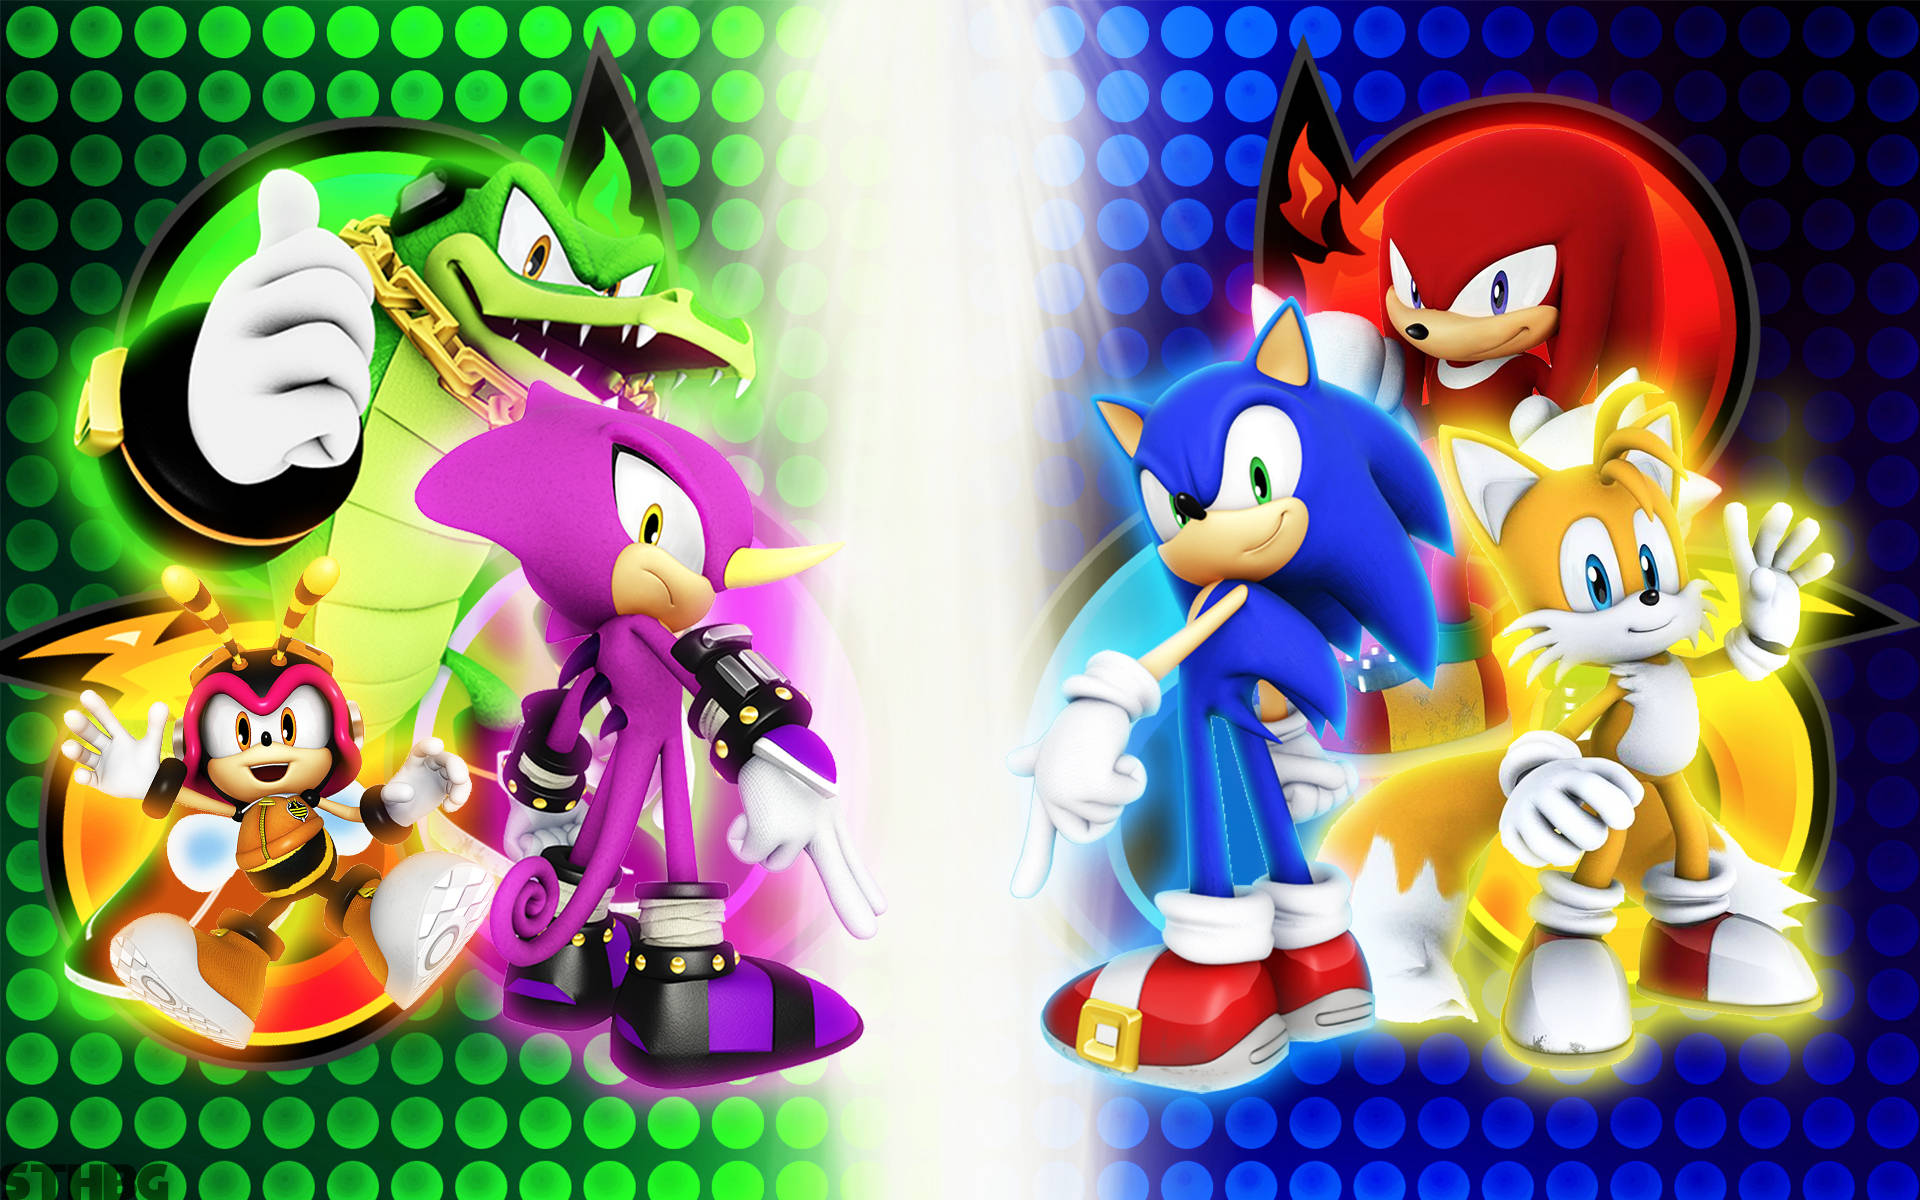 Espio The Chameleon&Hedgehog Characters Engaging in an Animated Power Play. Wallpaper